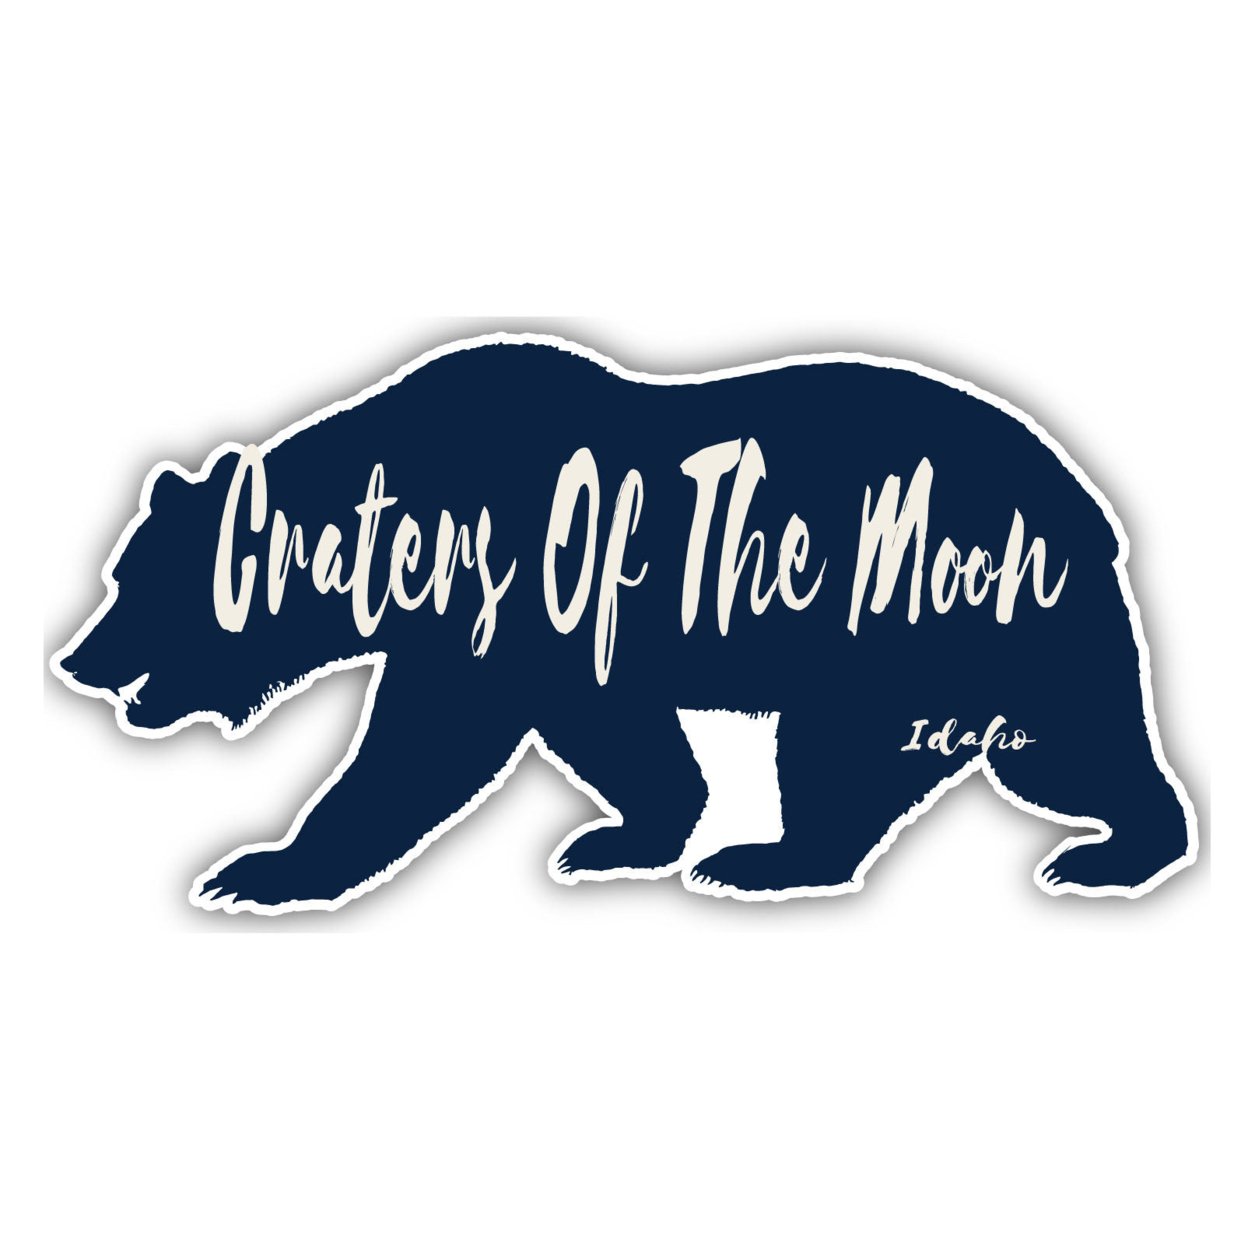 Craters Of The Moon Idaho Souvenir Decorative Stickers (Choose Theme And Size) - Single Unit, 10-Inch, Bear